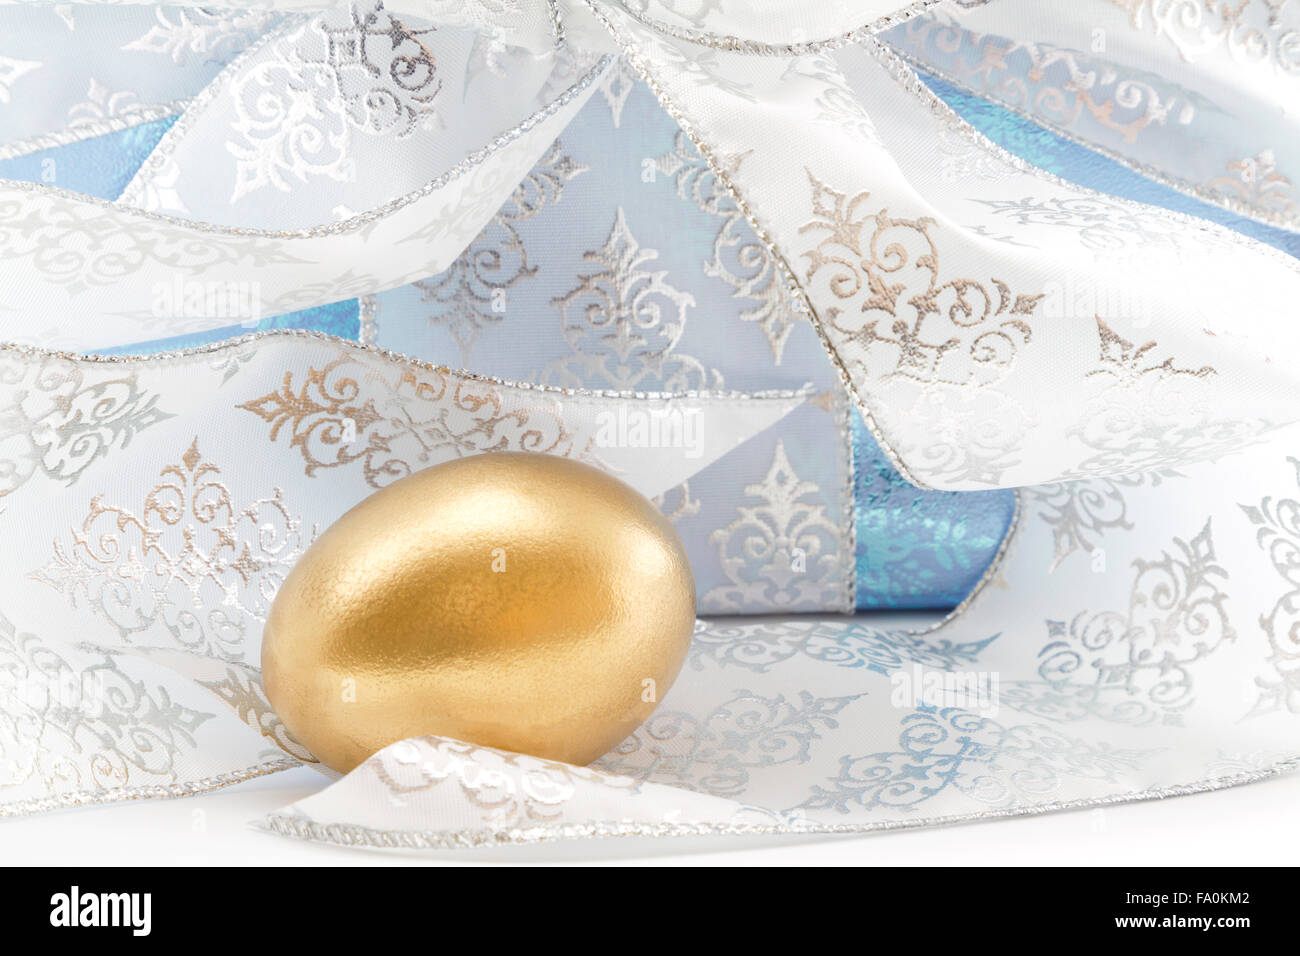 Ice blue wrapped package with silver and white ribbon placed behind gold nest egg. Stock Photo